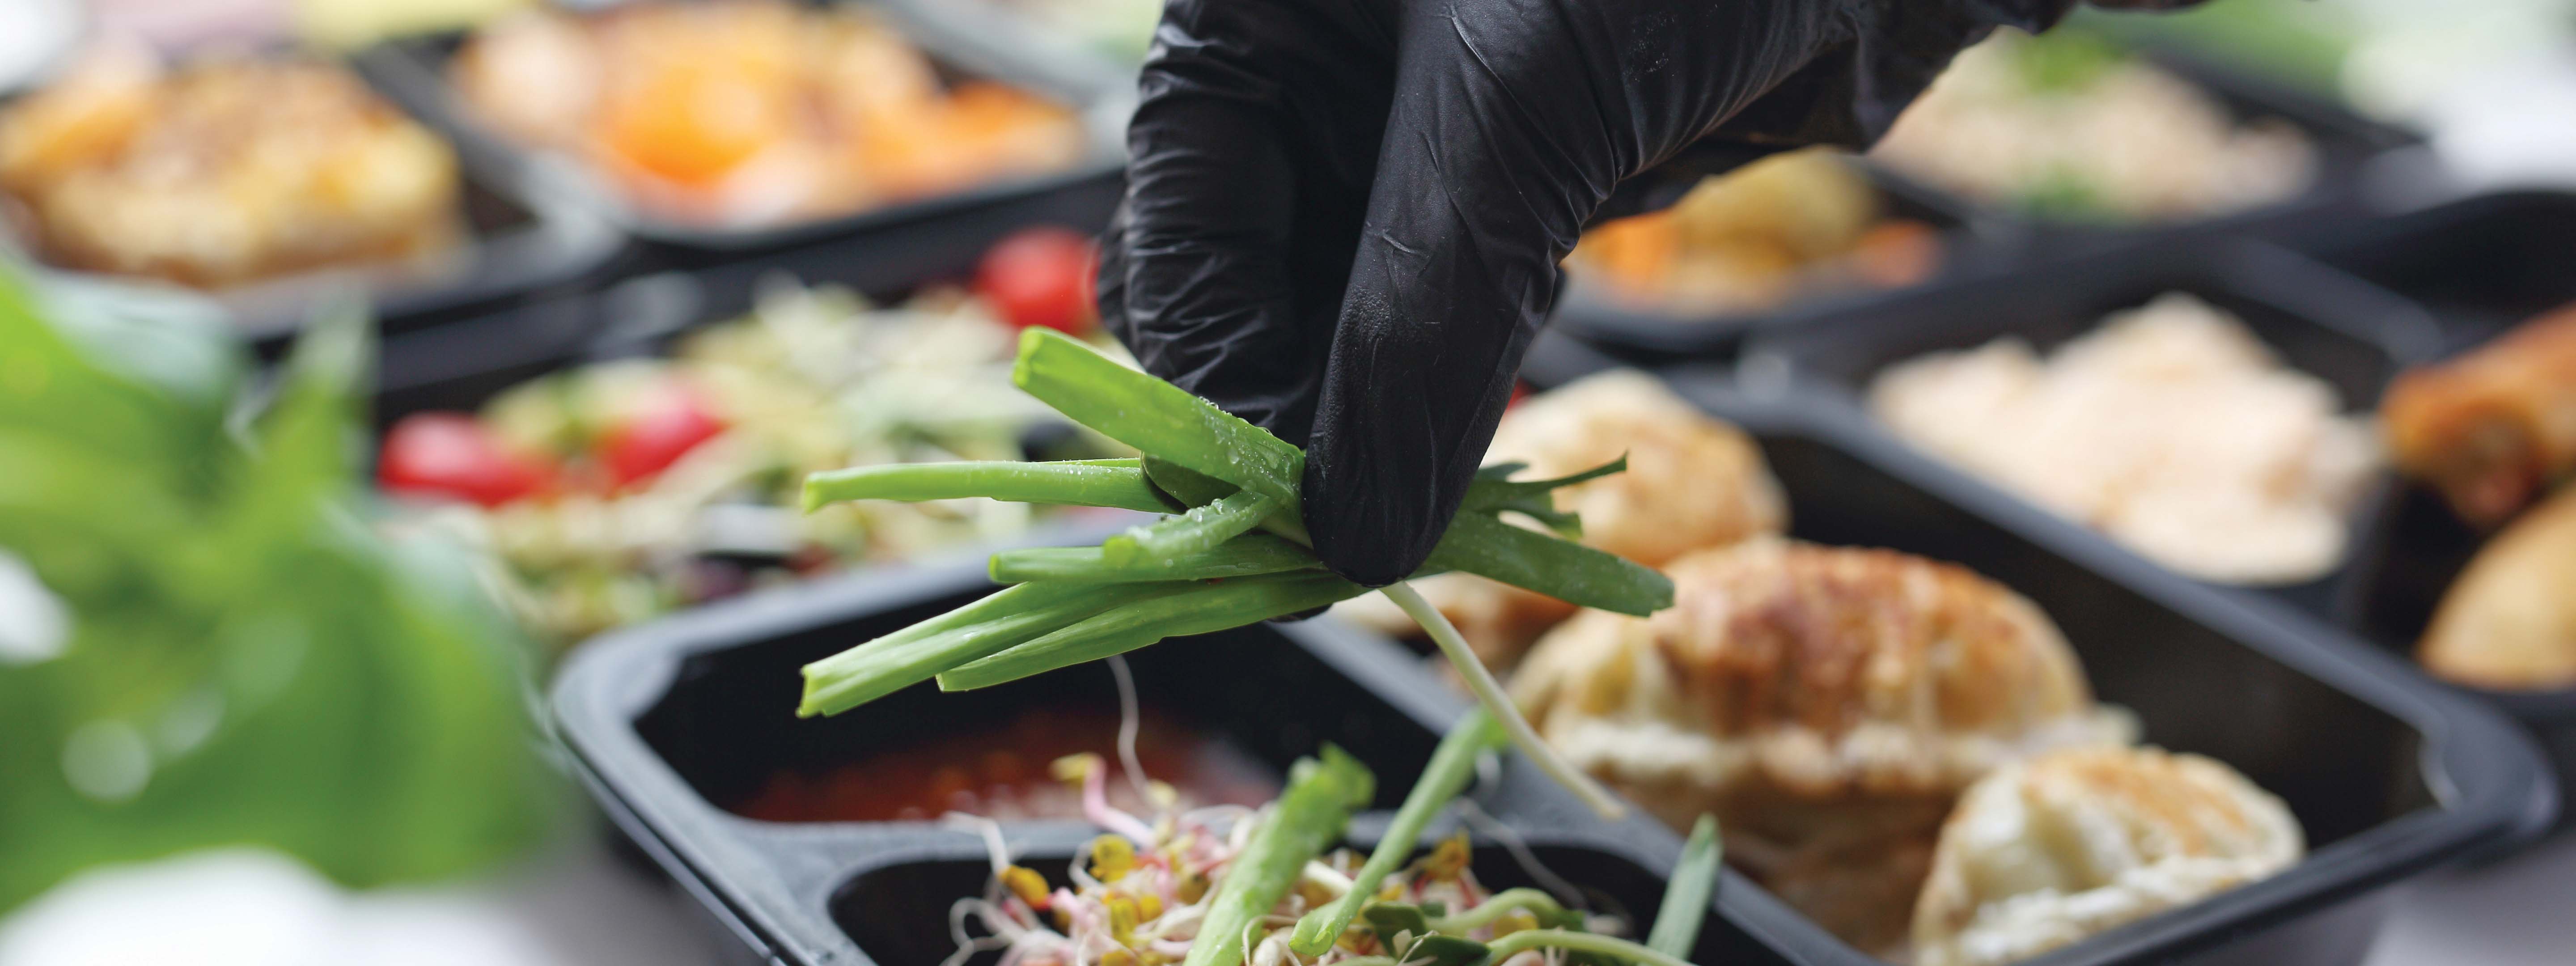 What is the key to a successful salad bar?